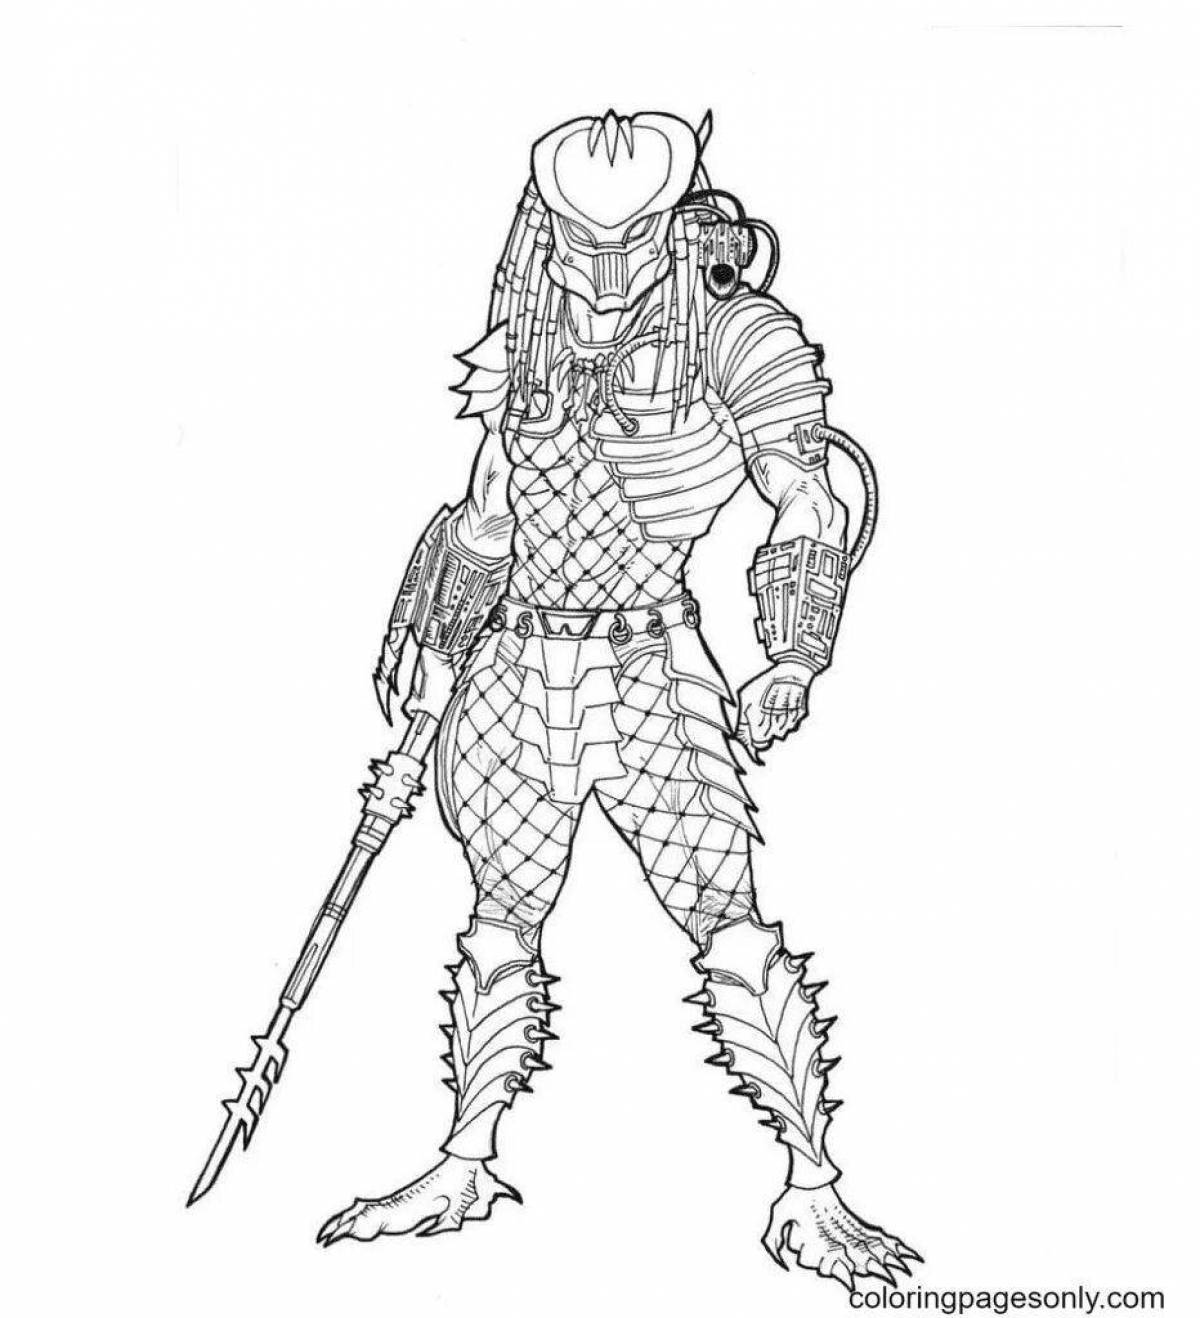 Dynamic akado fighters coloring page